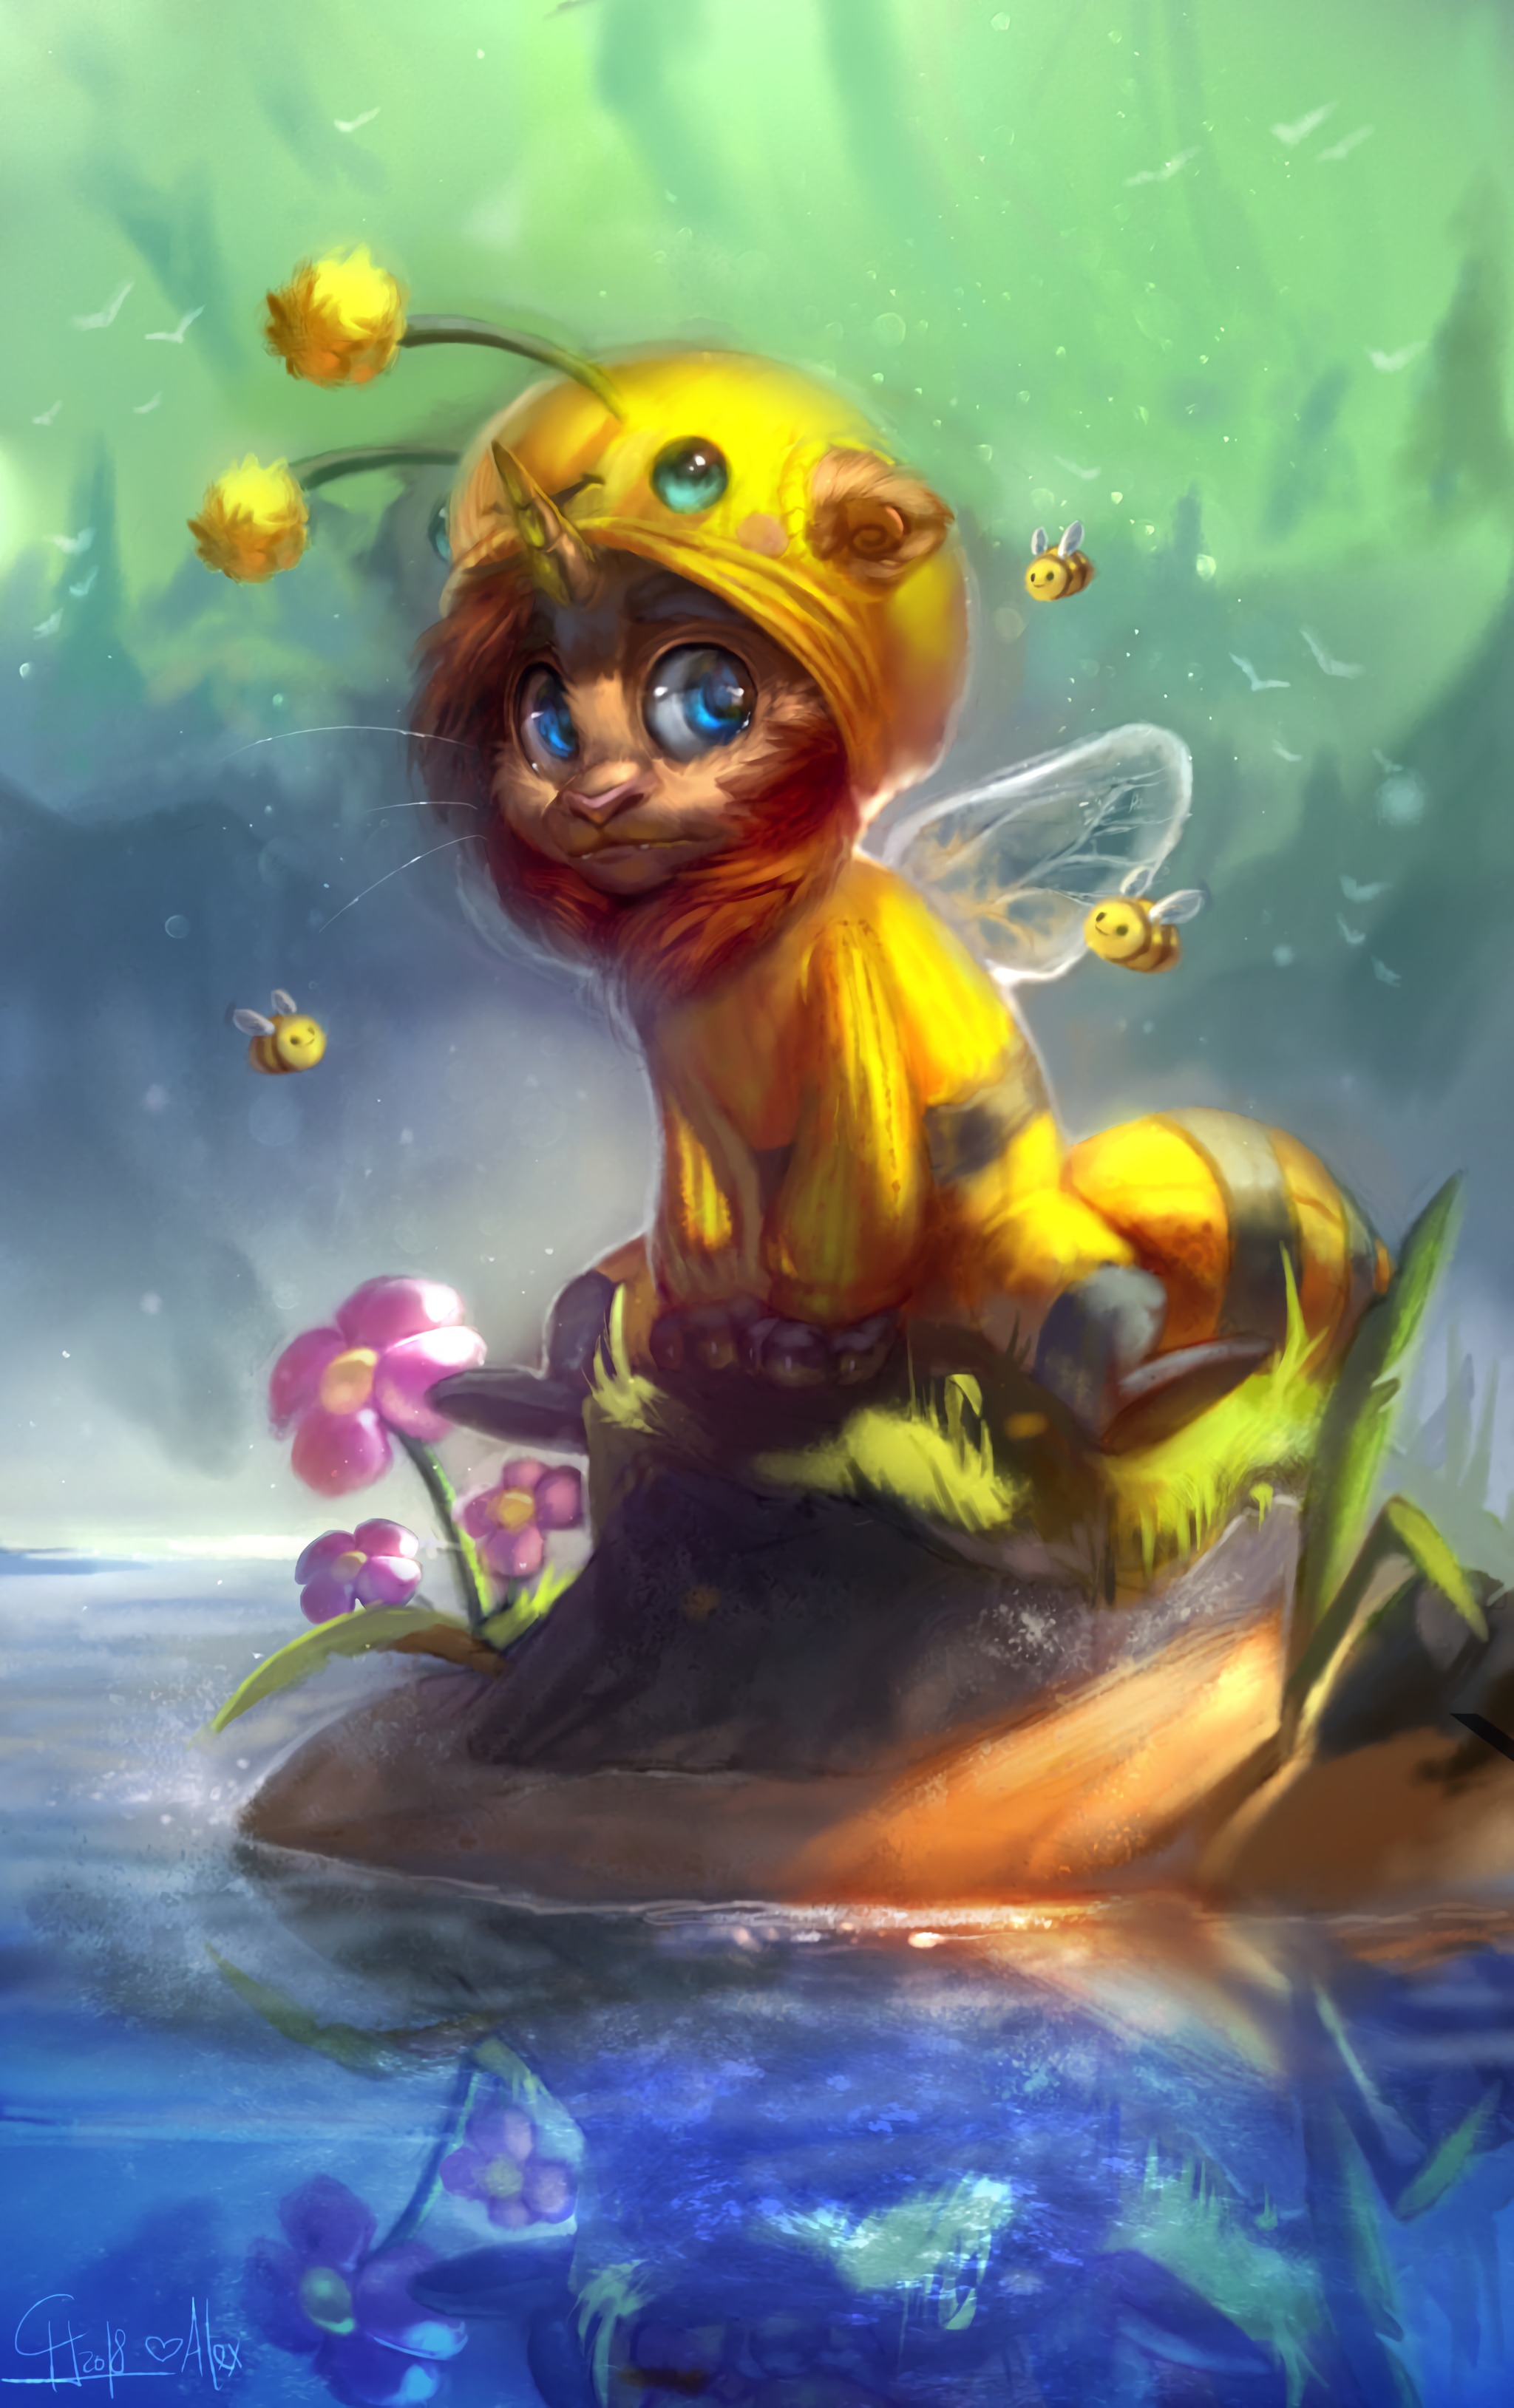 144381 Screensavers and Wallpapers Bee for phone. Download flowers, art, bee, being, creature, costume pictures for free